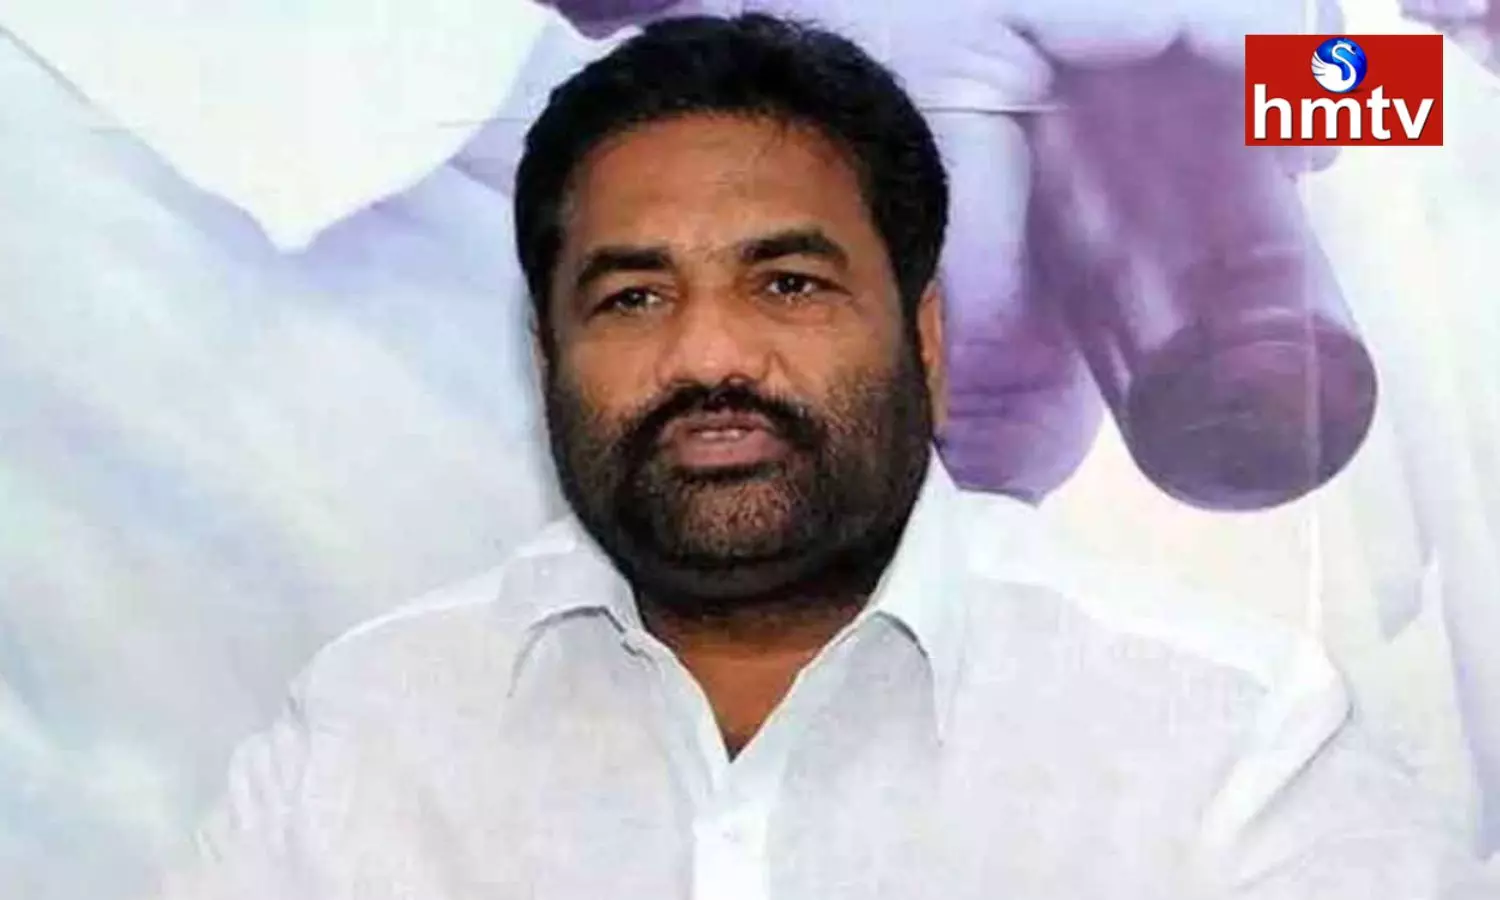 Kotamreddy Sridhar Reddy could not stand the insults and came out